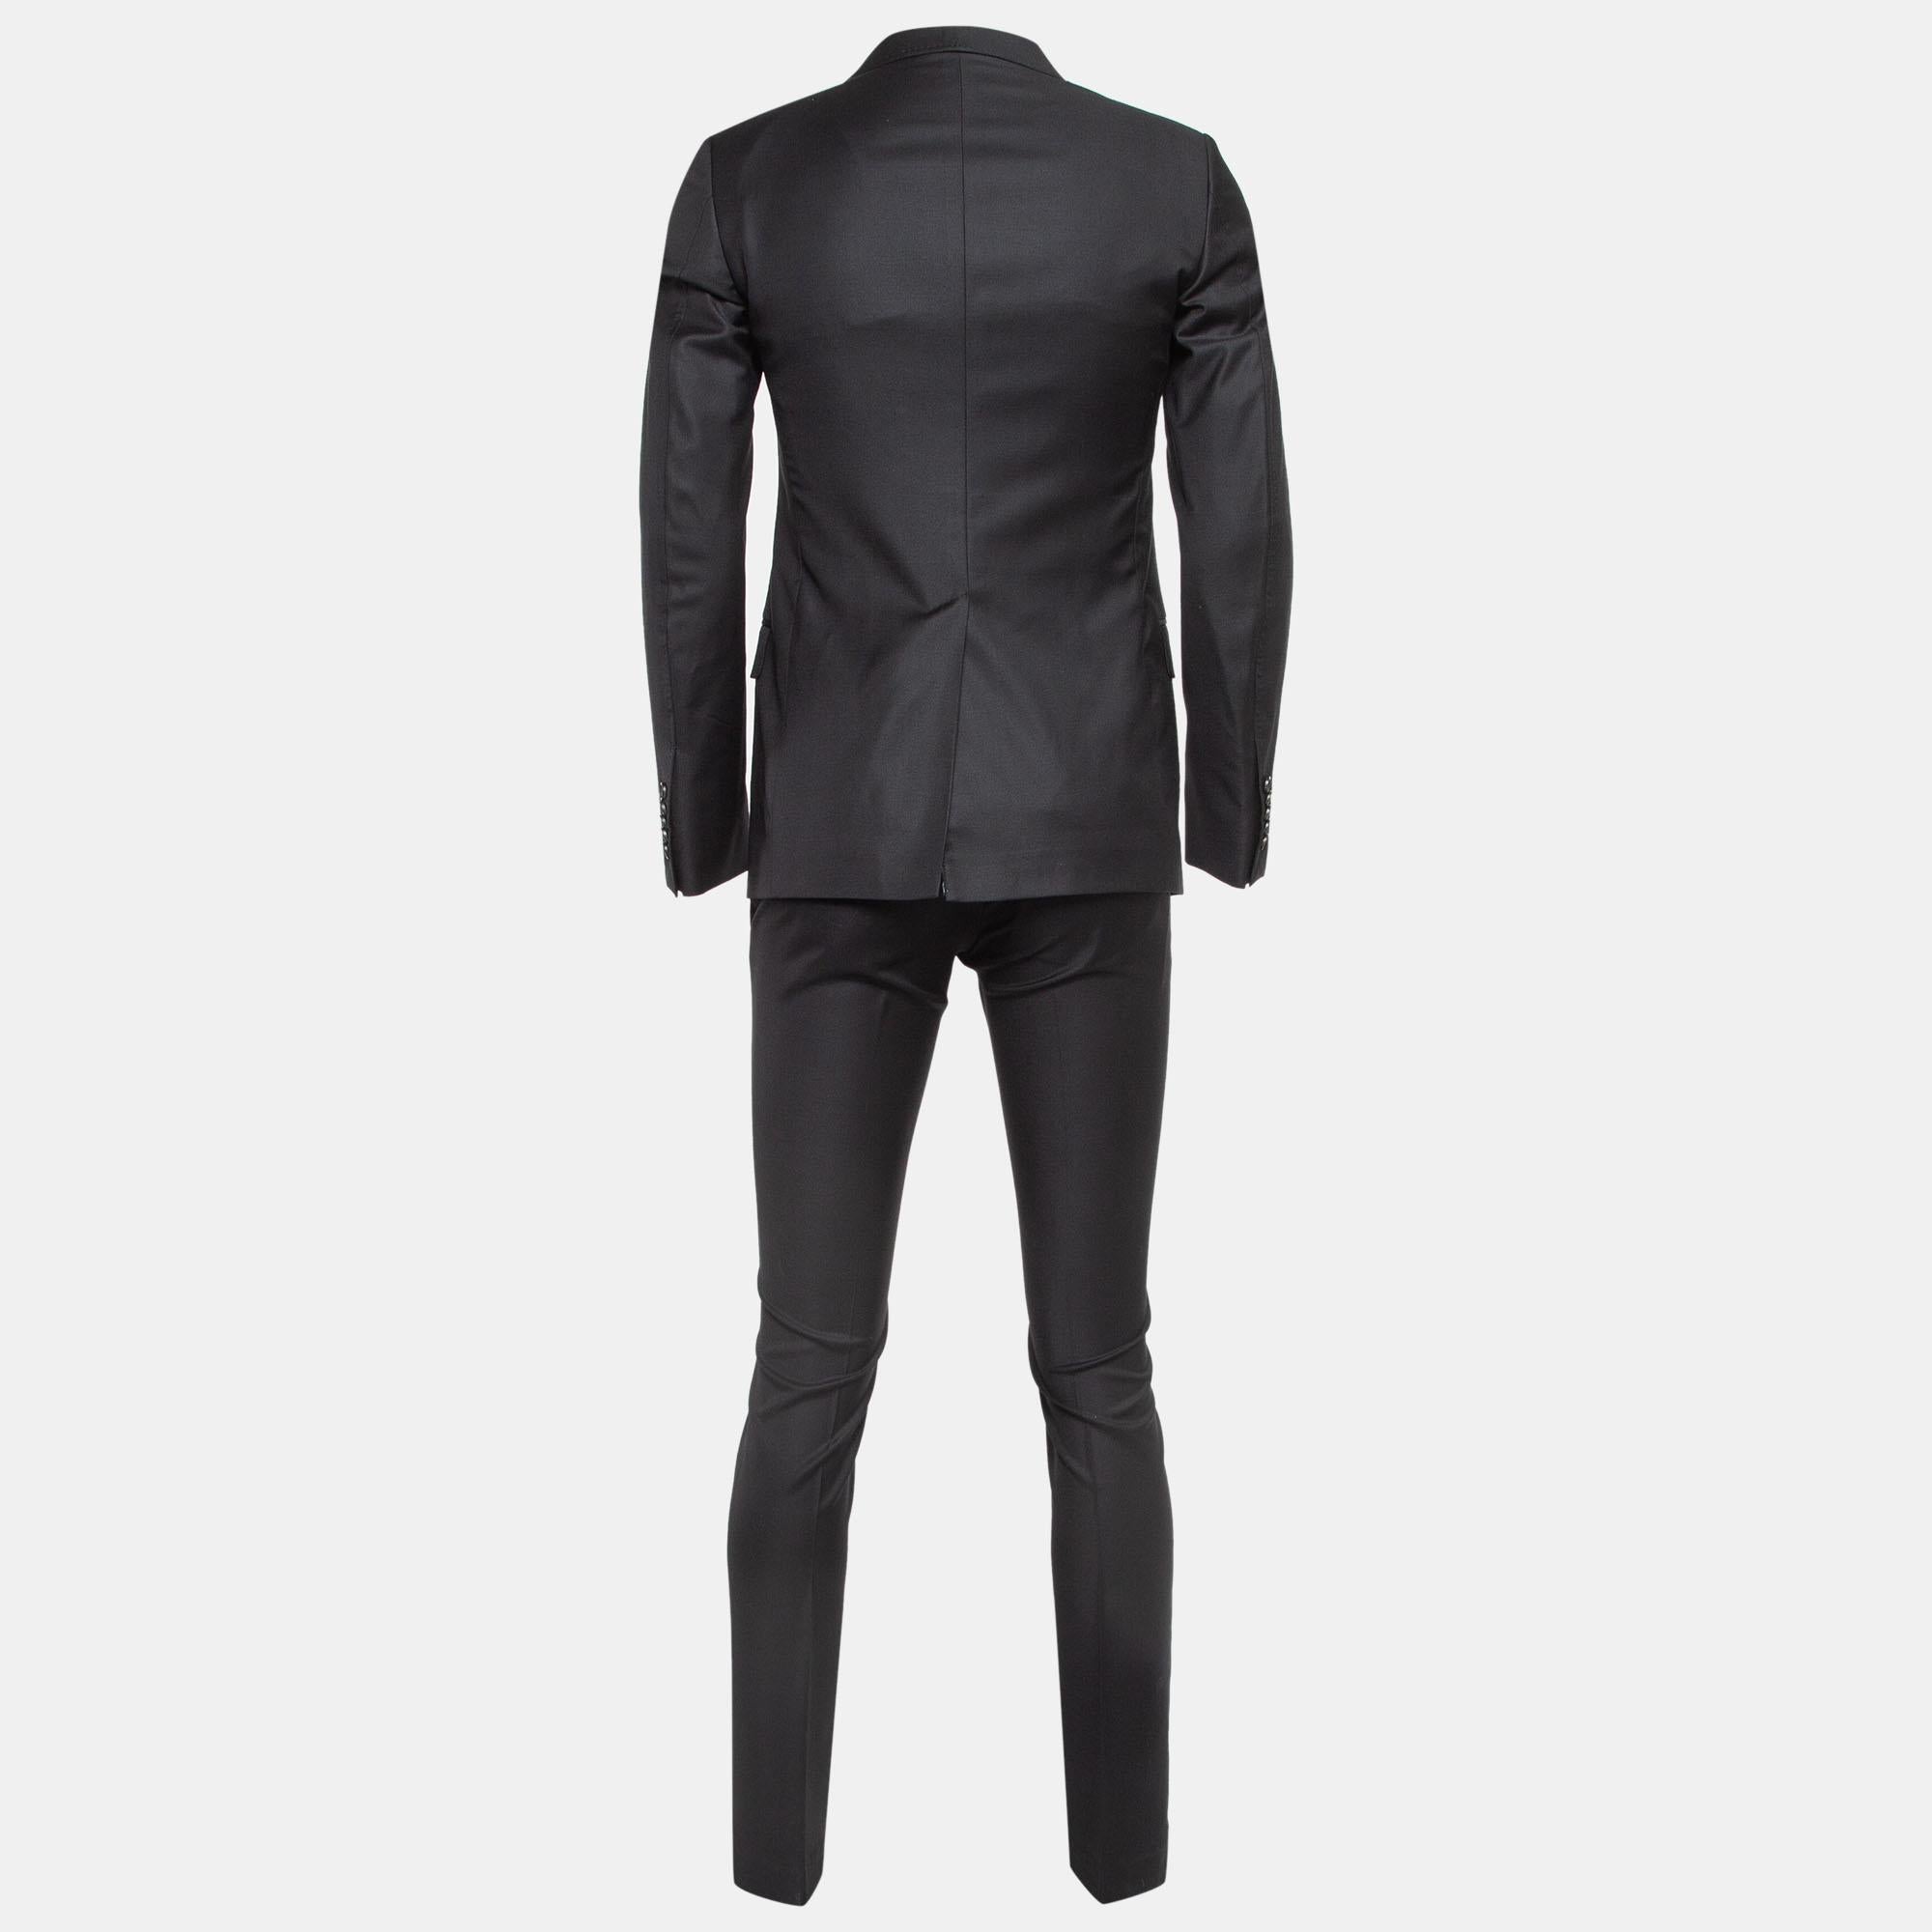 Characterized by impeccable tailoring, a good fit, and the use of quality materials, this suit set will help you serve dapper looks. Style it with oxfords or loafers to bring out the stylish appeal of the creation.

Includes: Original Dustbag,